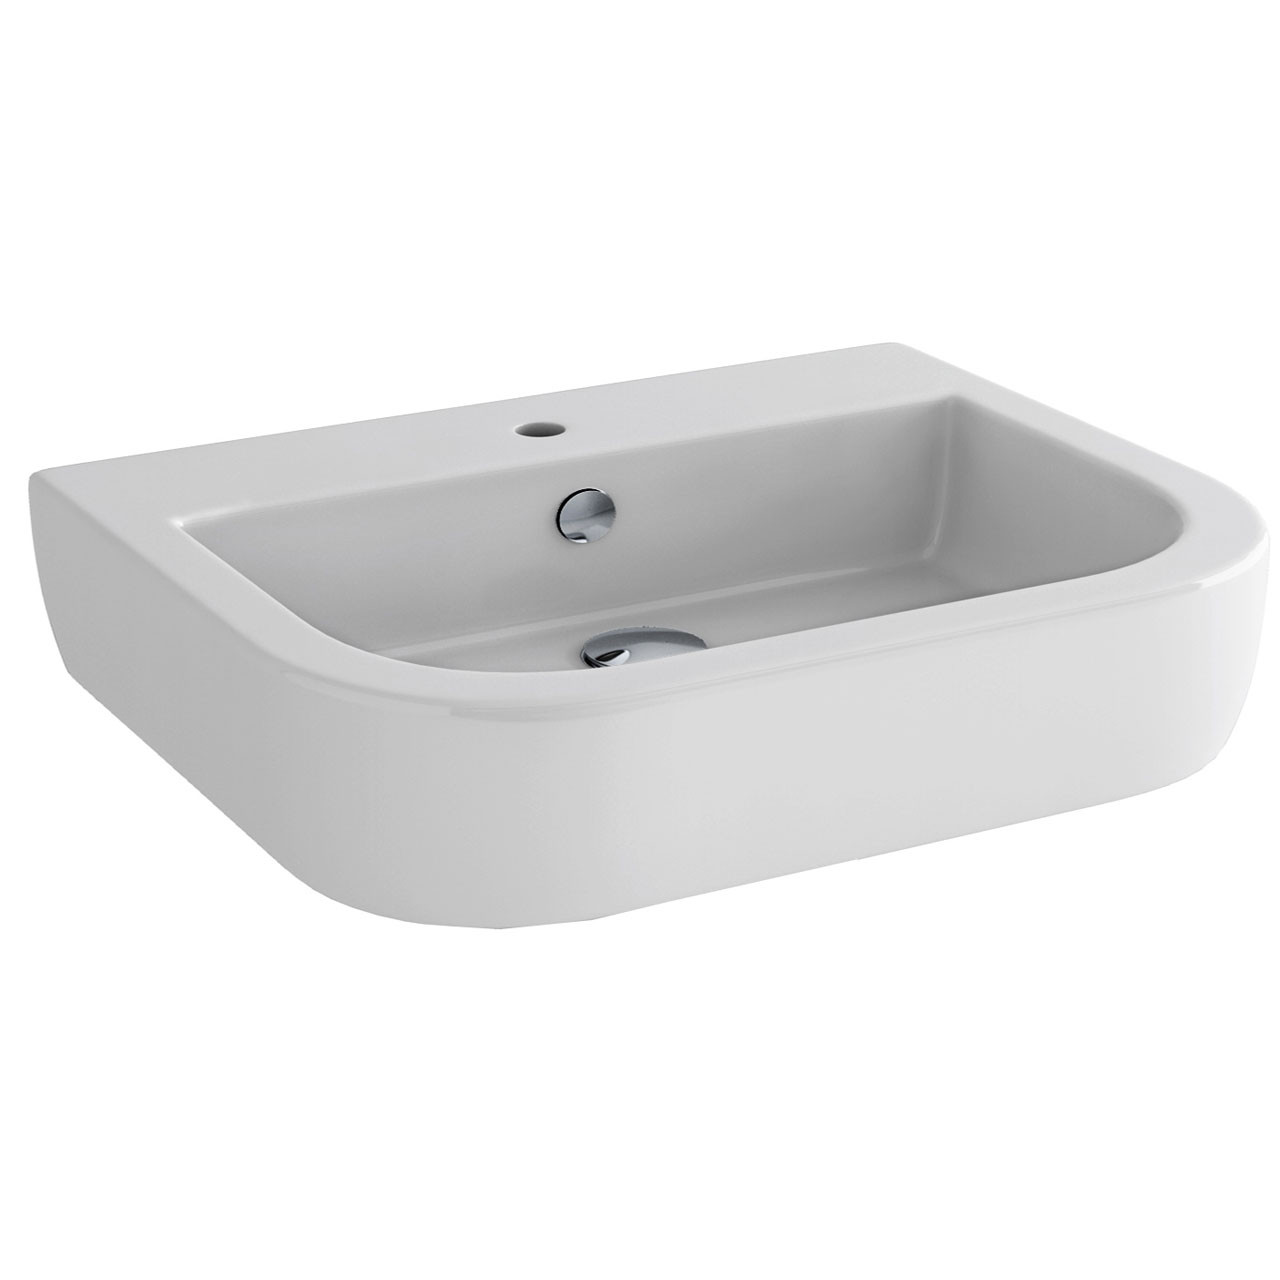 Photograph of White Handrinse Cloakroom 1 Taphole Basin - 400mm